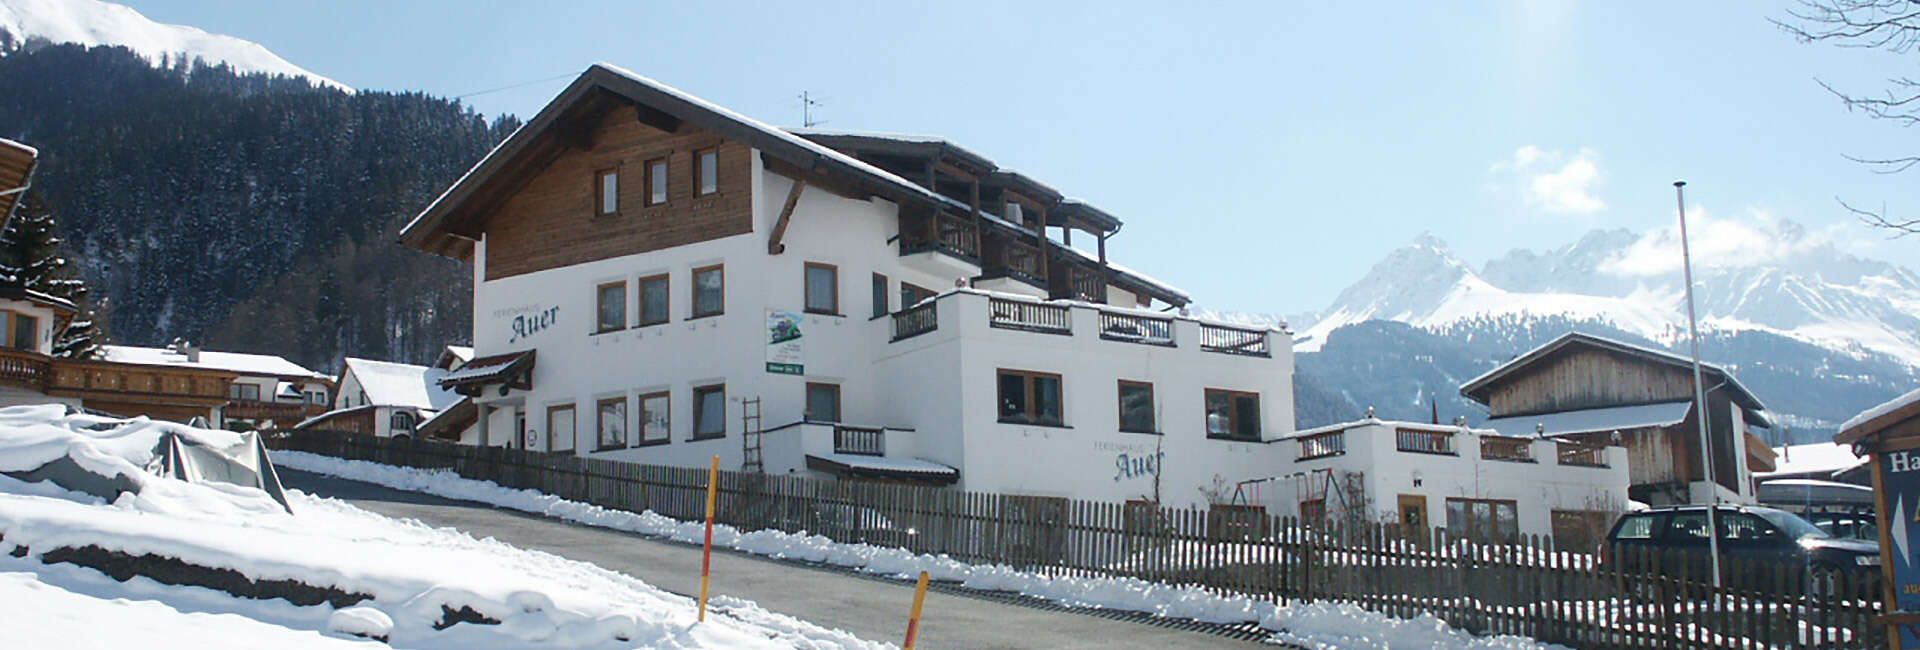  Holiday home Auer in winter